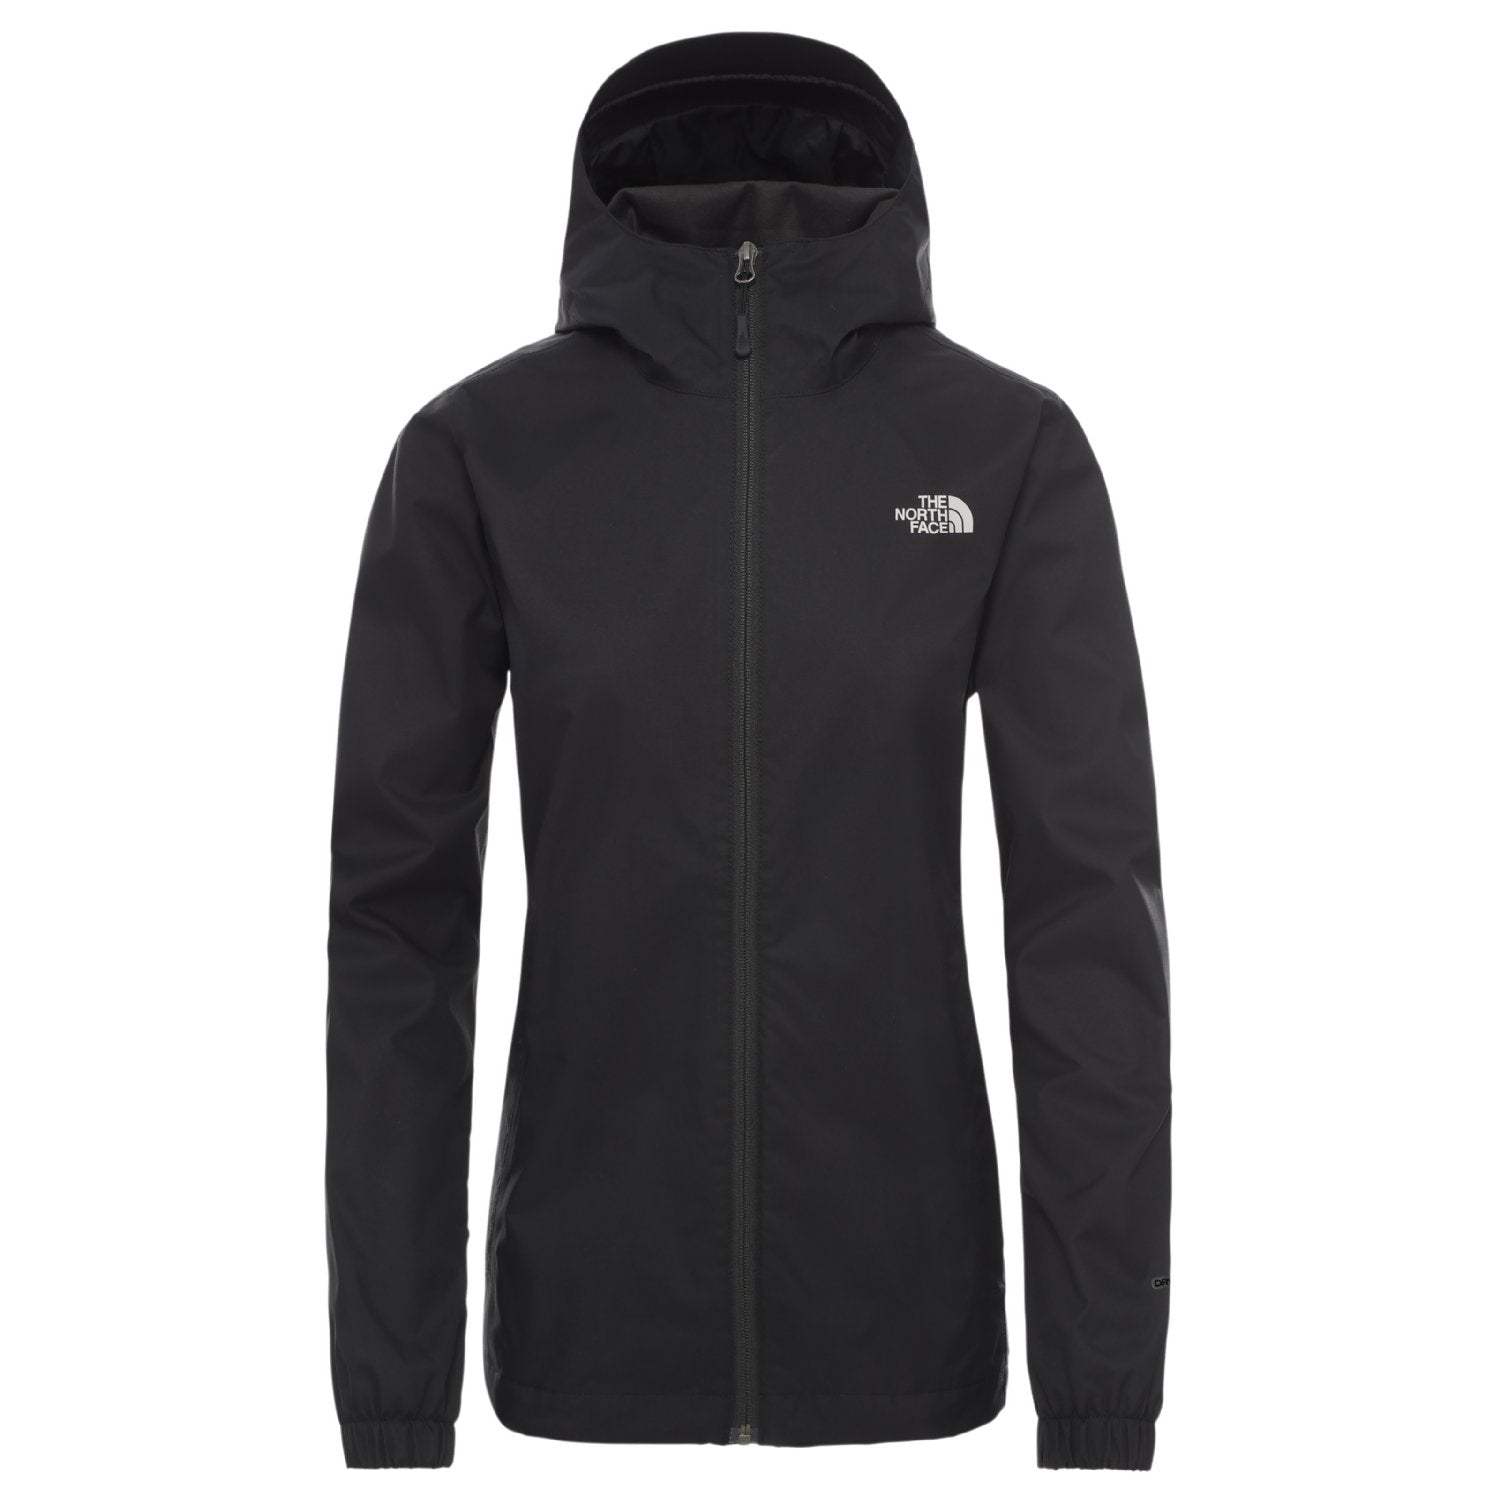 Women's Quest Jacket by The North Face - The Luxury Promotional Gifts Company Limited